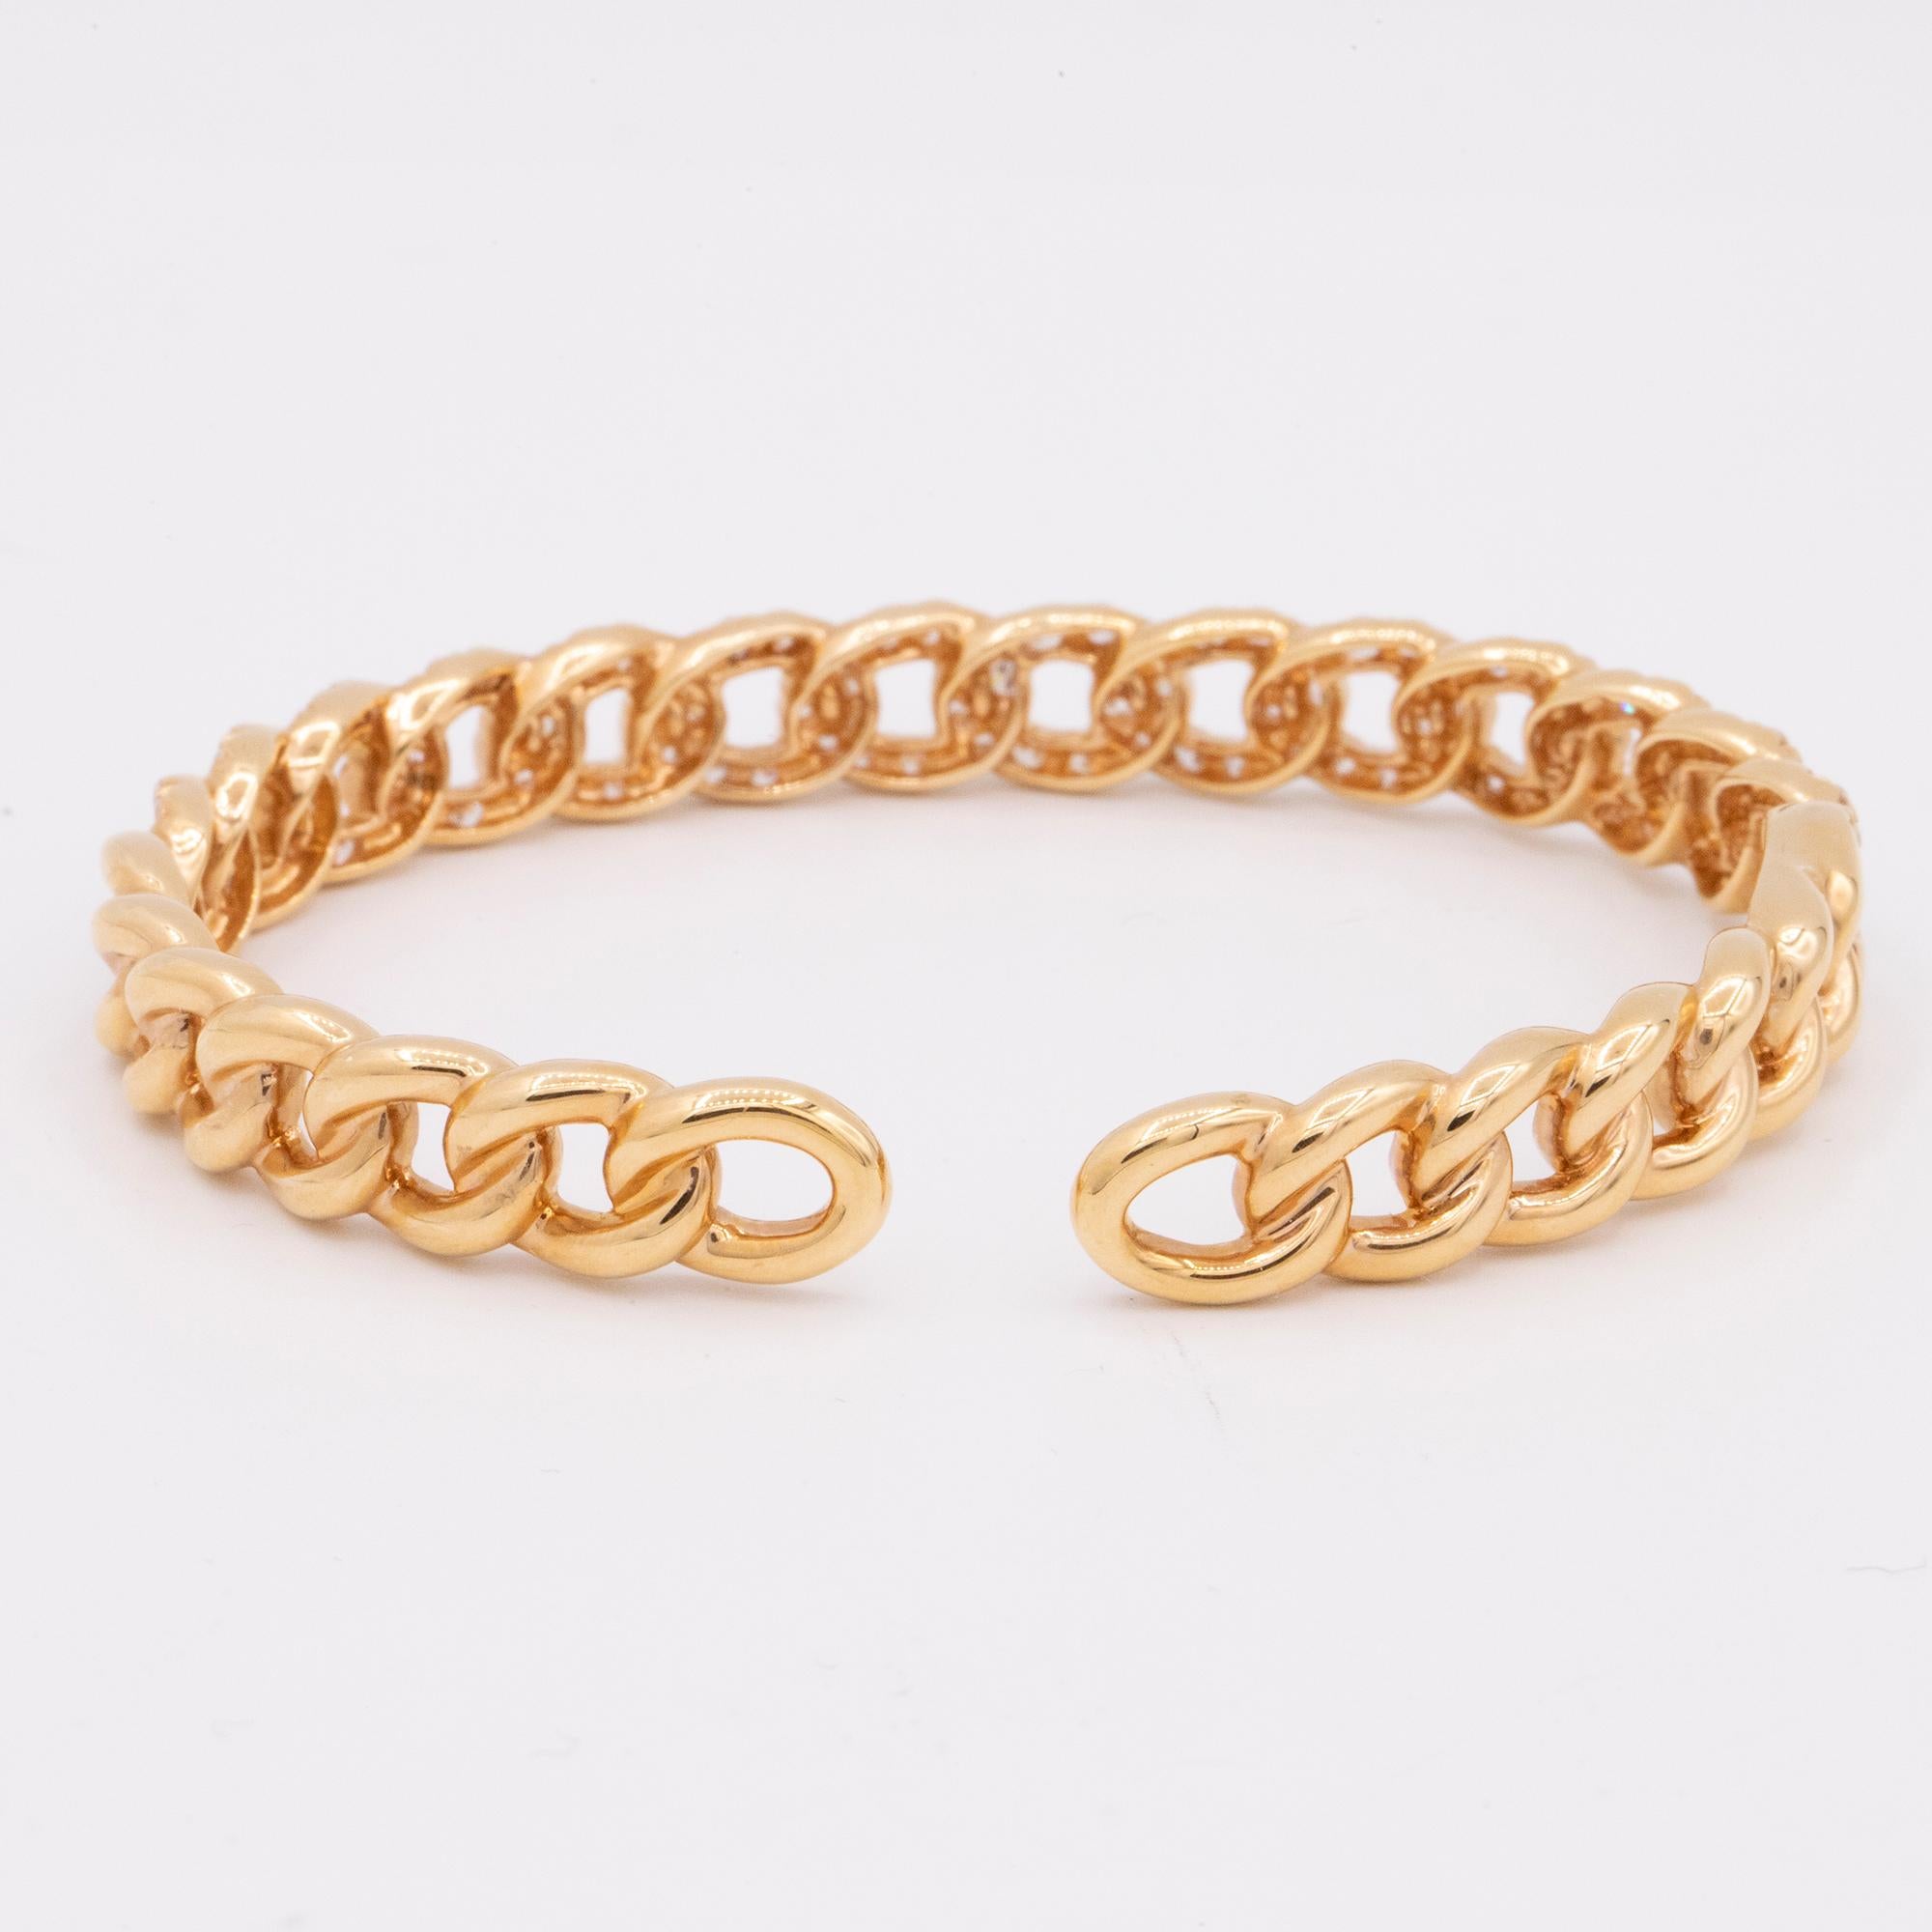 Classic chain link design bangle with 112 diamonds set half way on the bracelet, crafted in 18k rose gold. The diamond total 2.90 carats. H-I color and SI1-SI2 clarity. This bracelet has a hinged that opens to make getting it on and off easier. 8mm